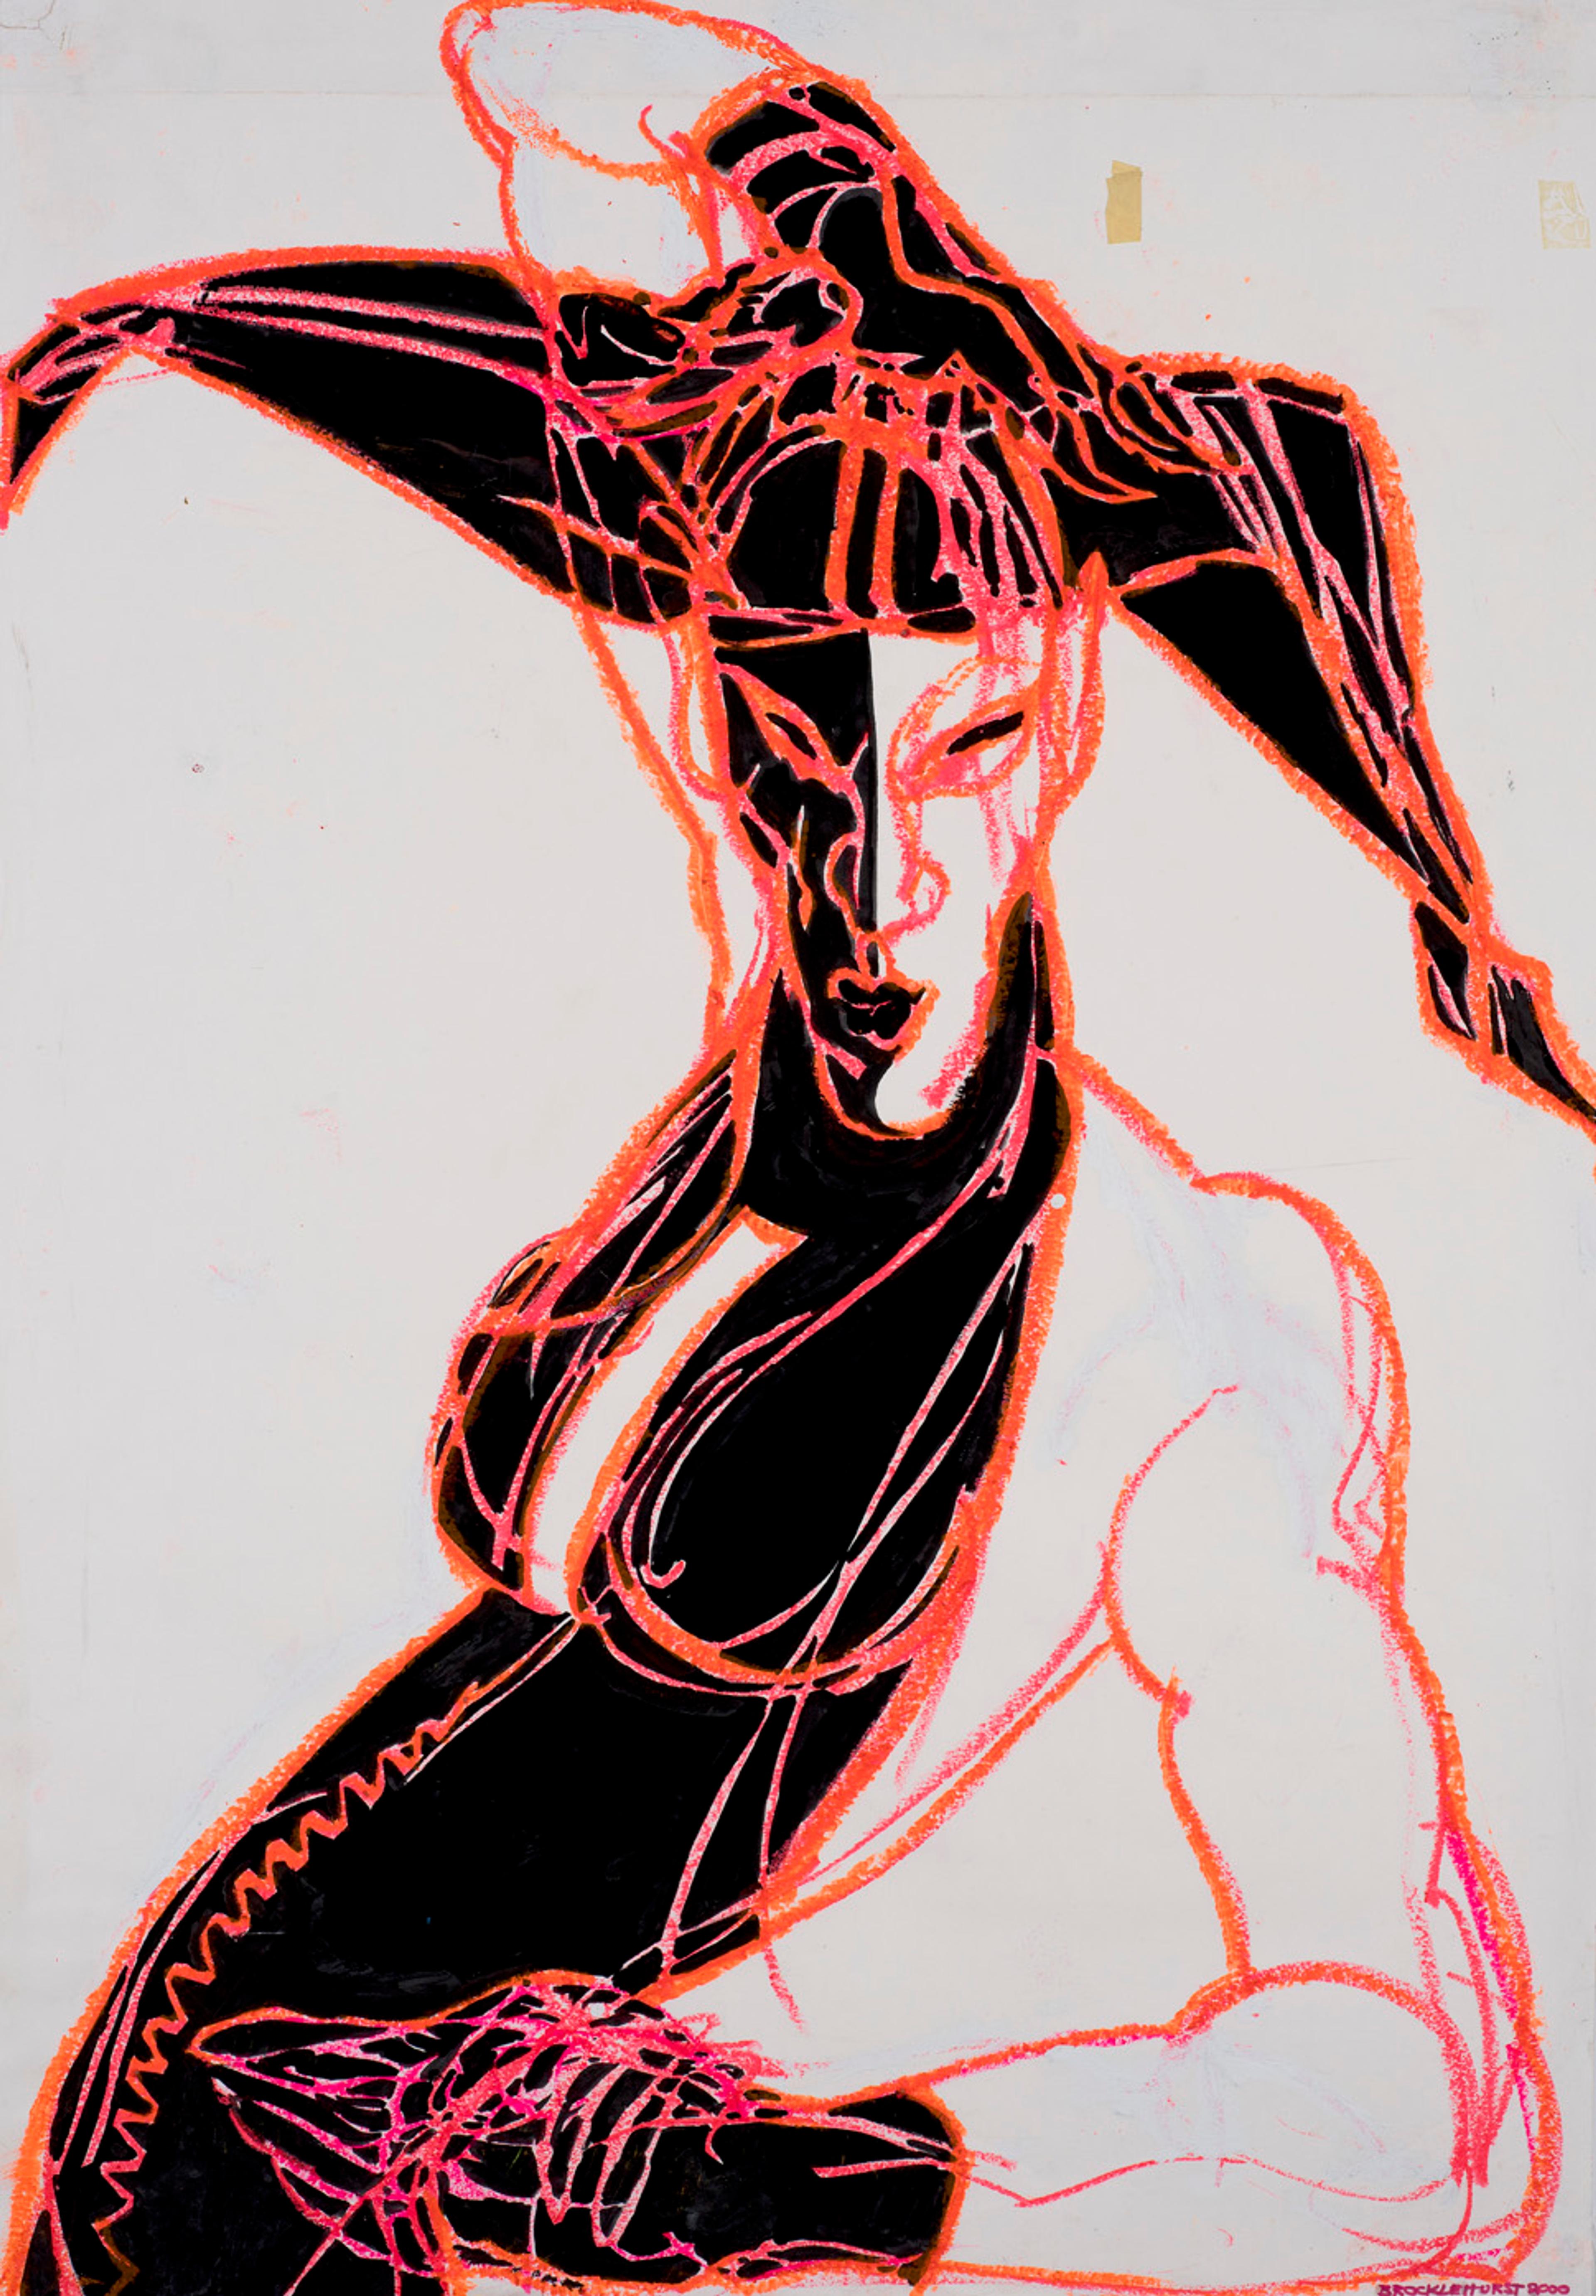 A drawing of a person dancing dressed in a black bodysuit, gloves and hat. They are drawn with red and orange lines on white paper.